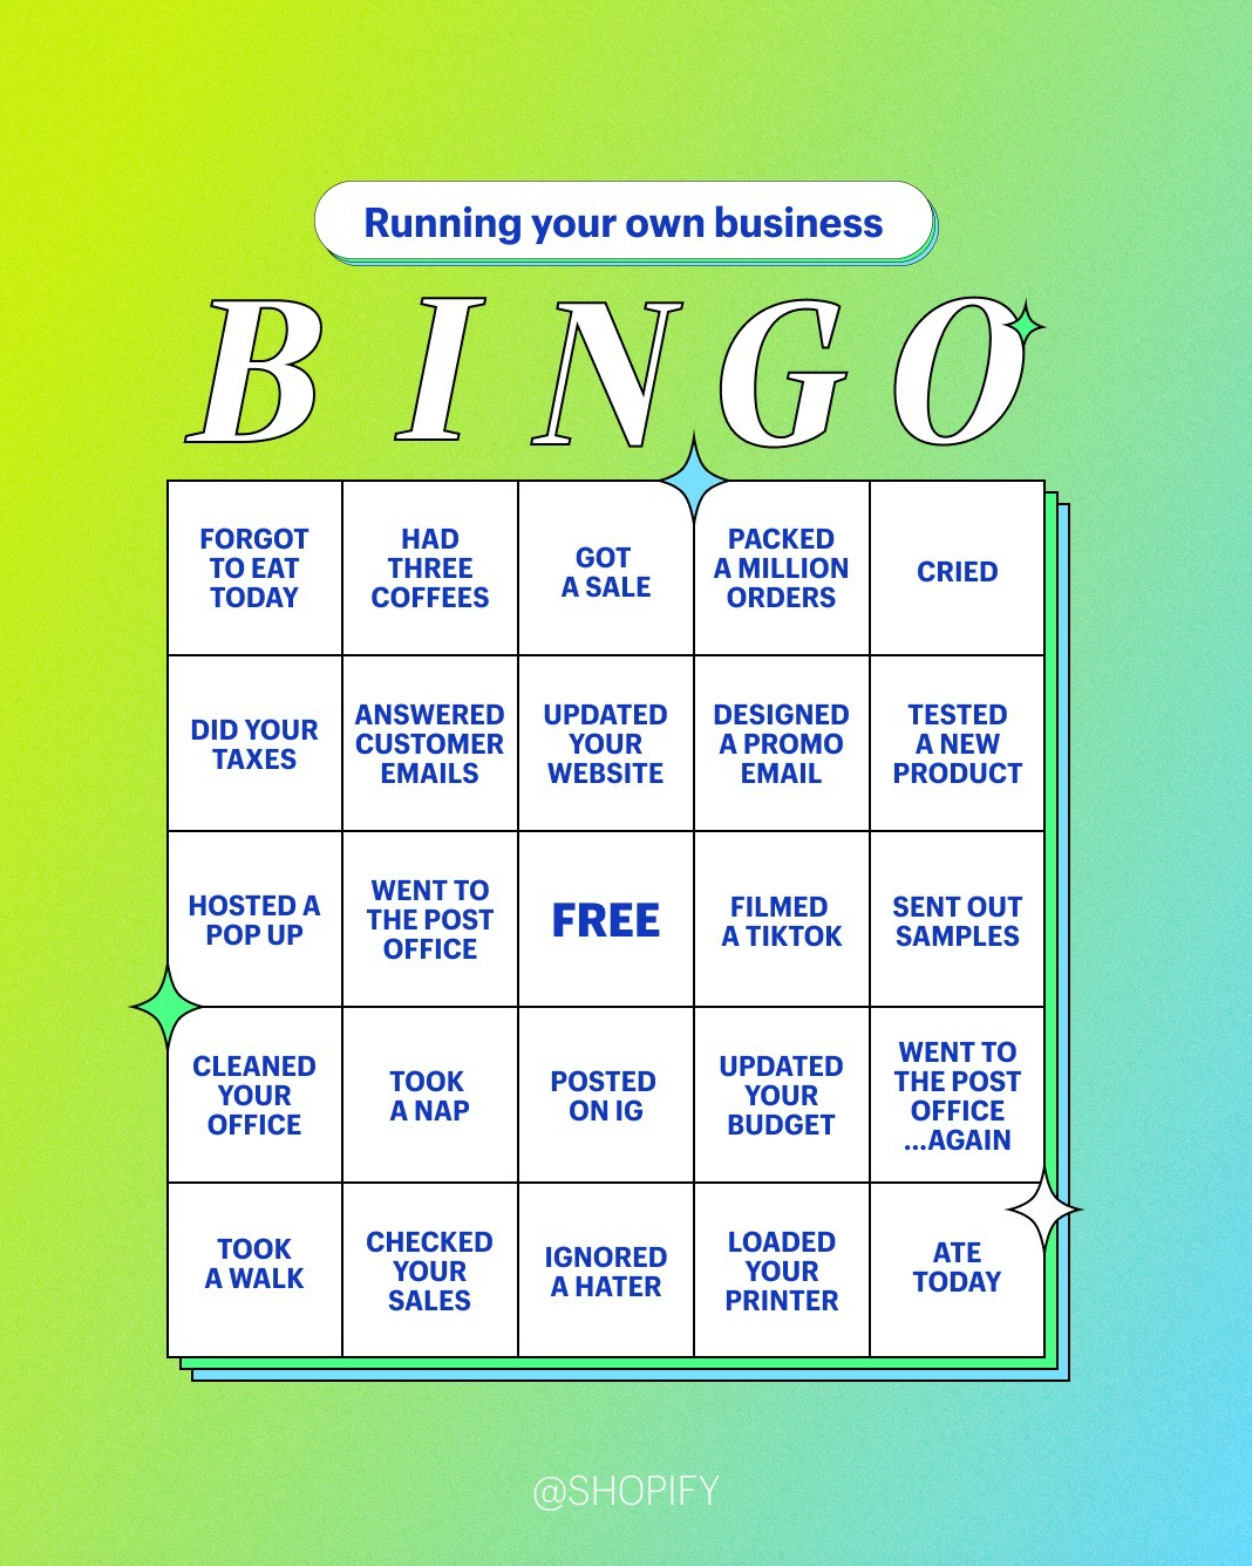 Running a business Bingo card posted on Shopify's Instagram